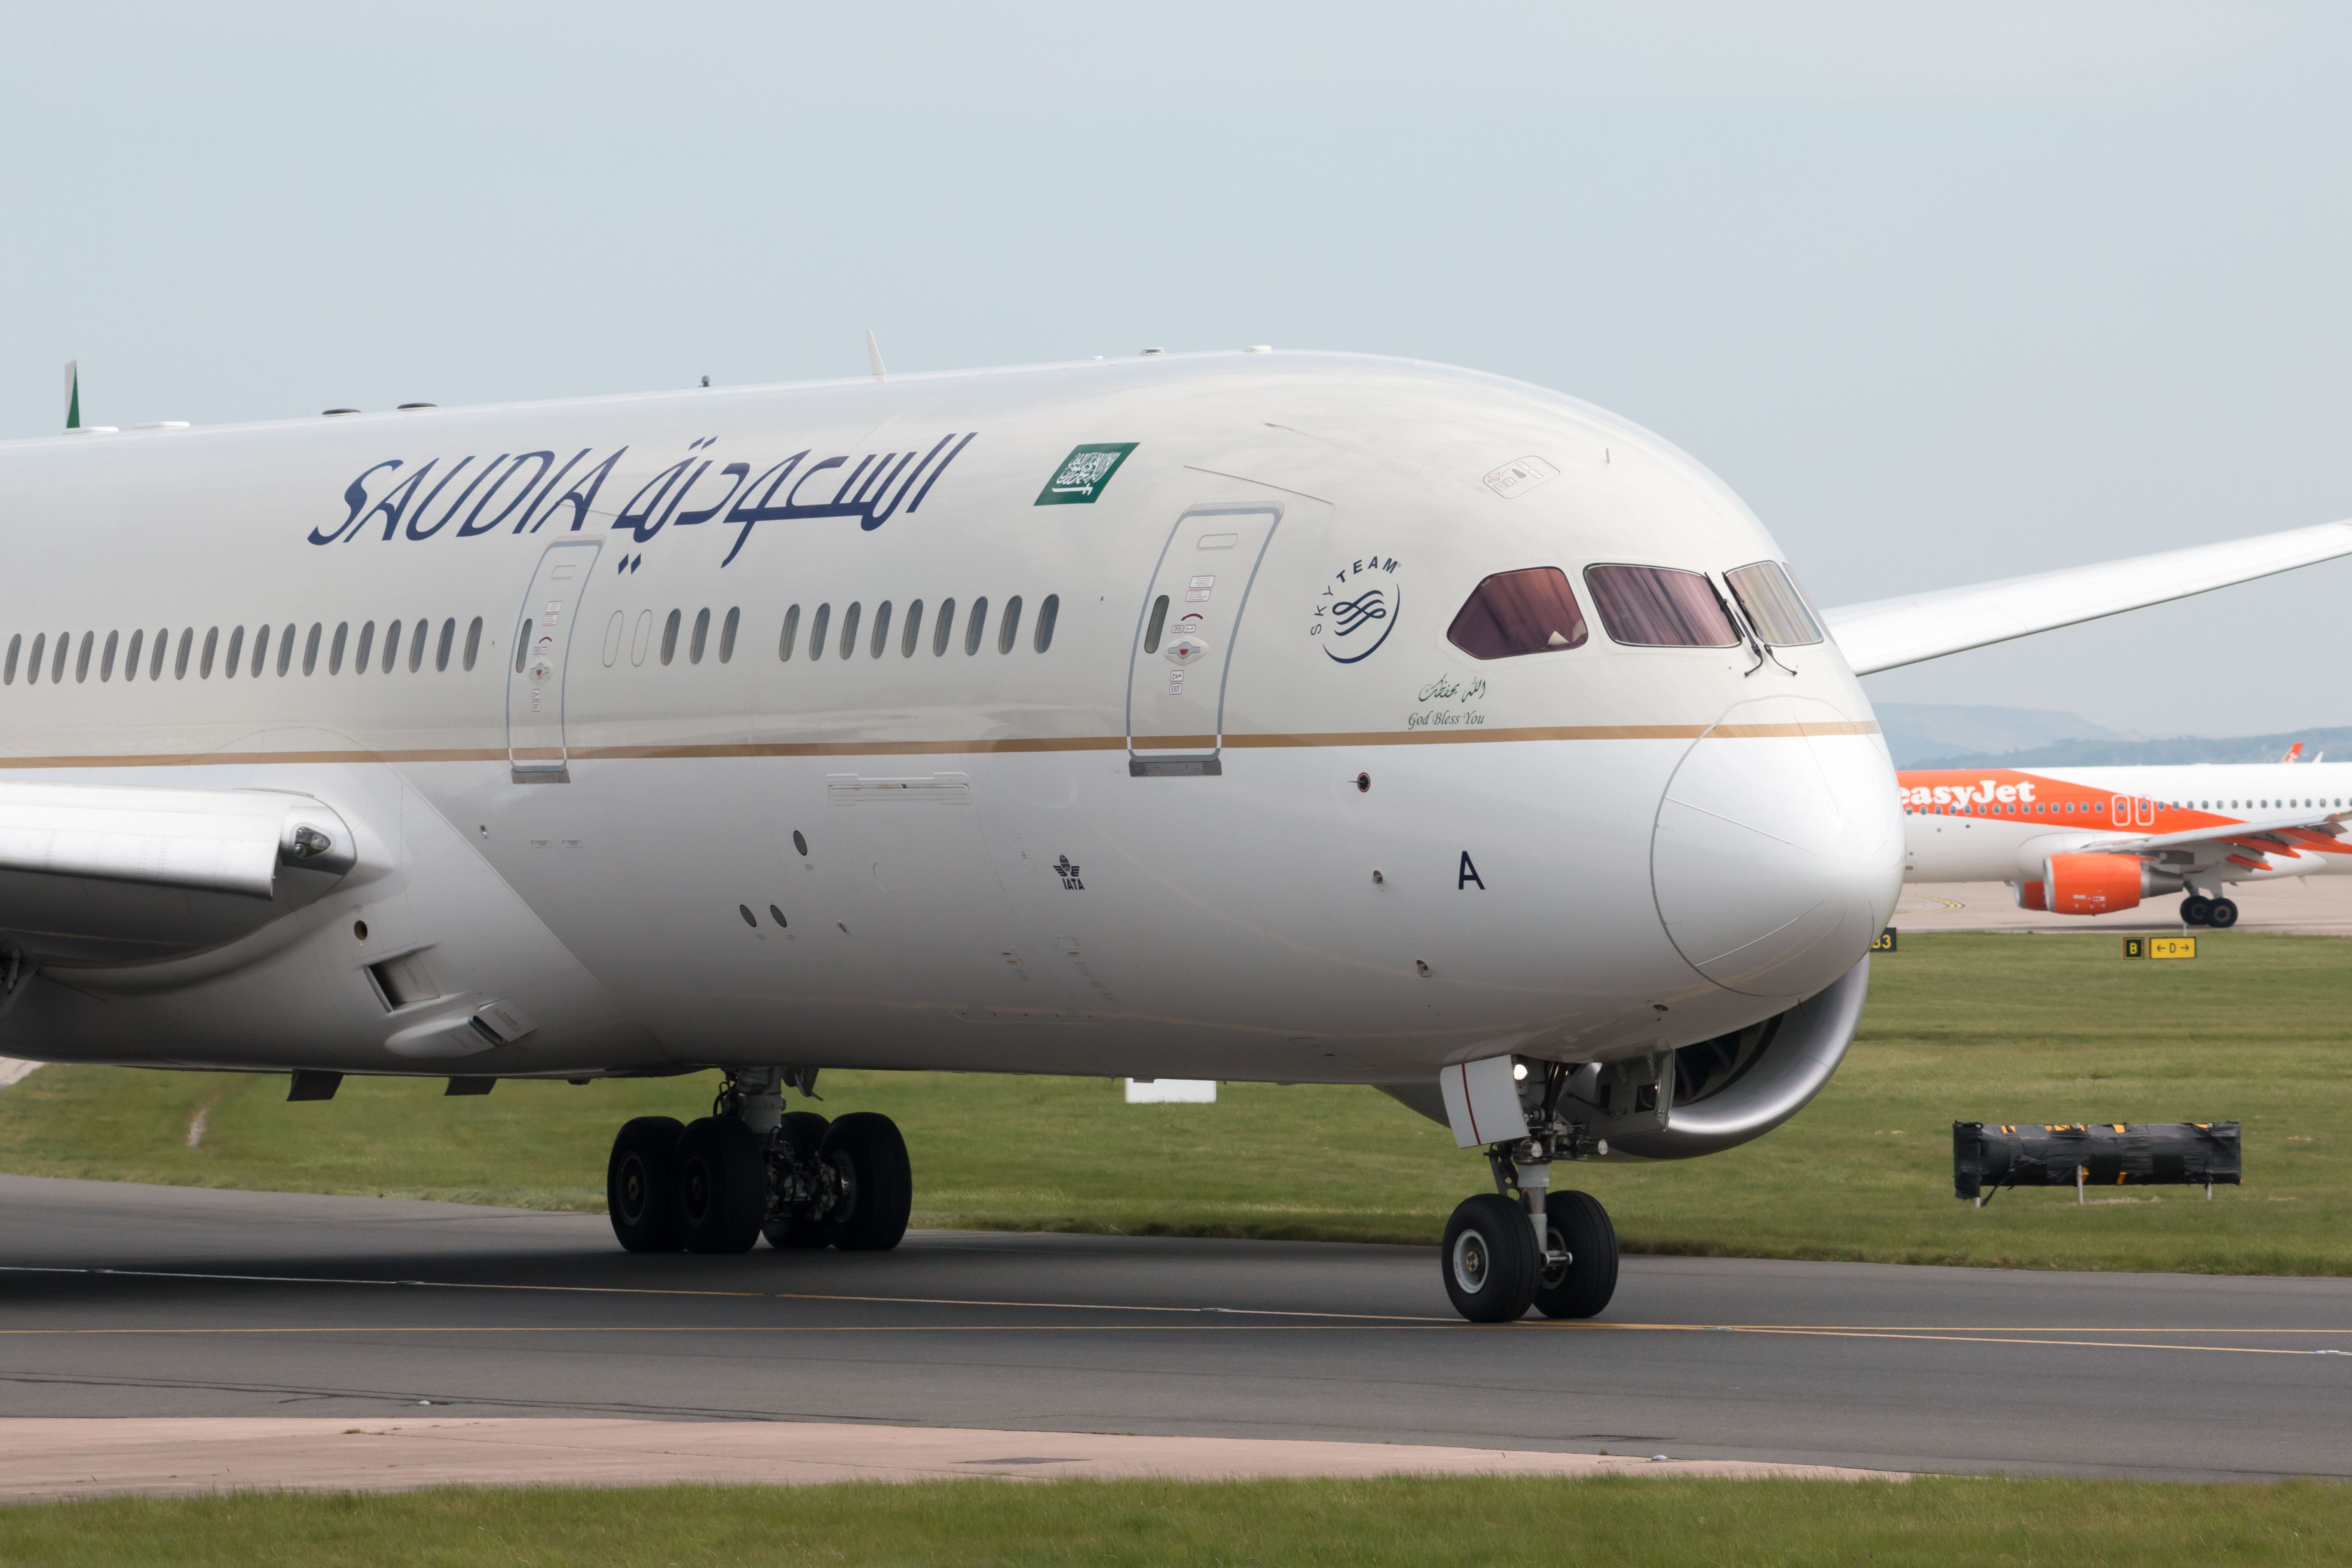 Saudia Boeing 787-9 Dreamliner taxiing at Manchester International Airport.